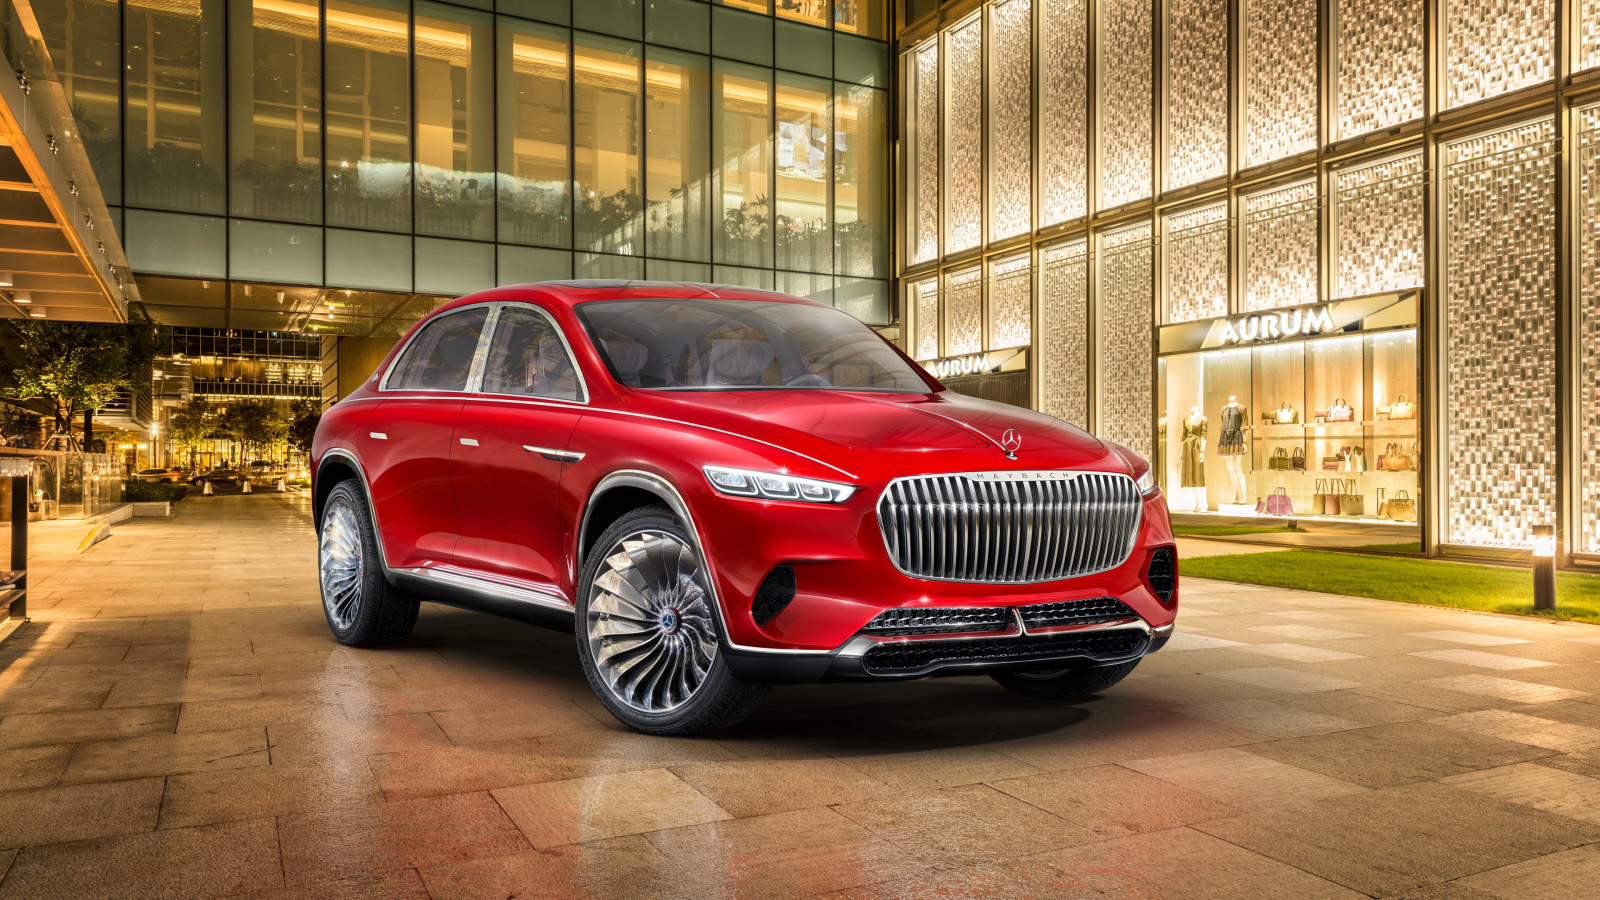 The Vision Mercedes Maybach Ultimate Luxury wallpaper 1600x900